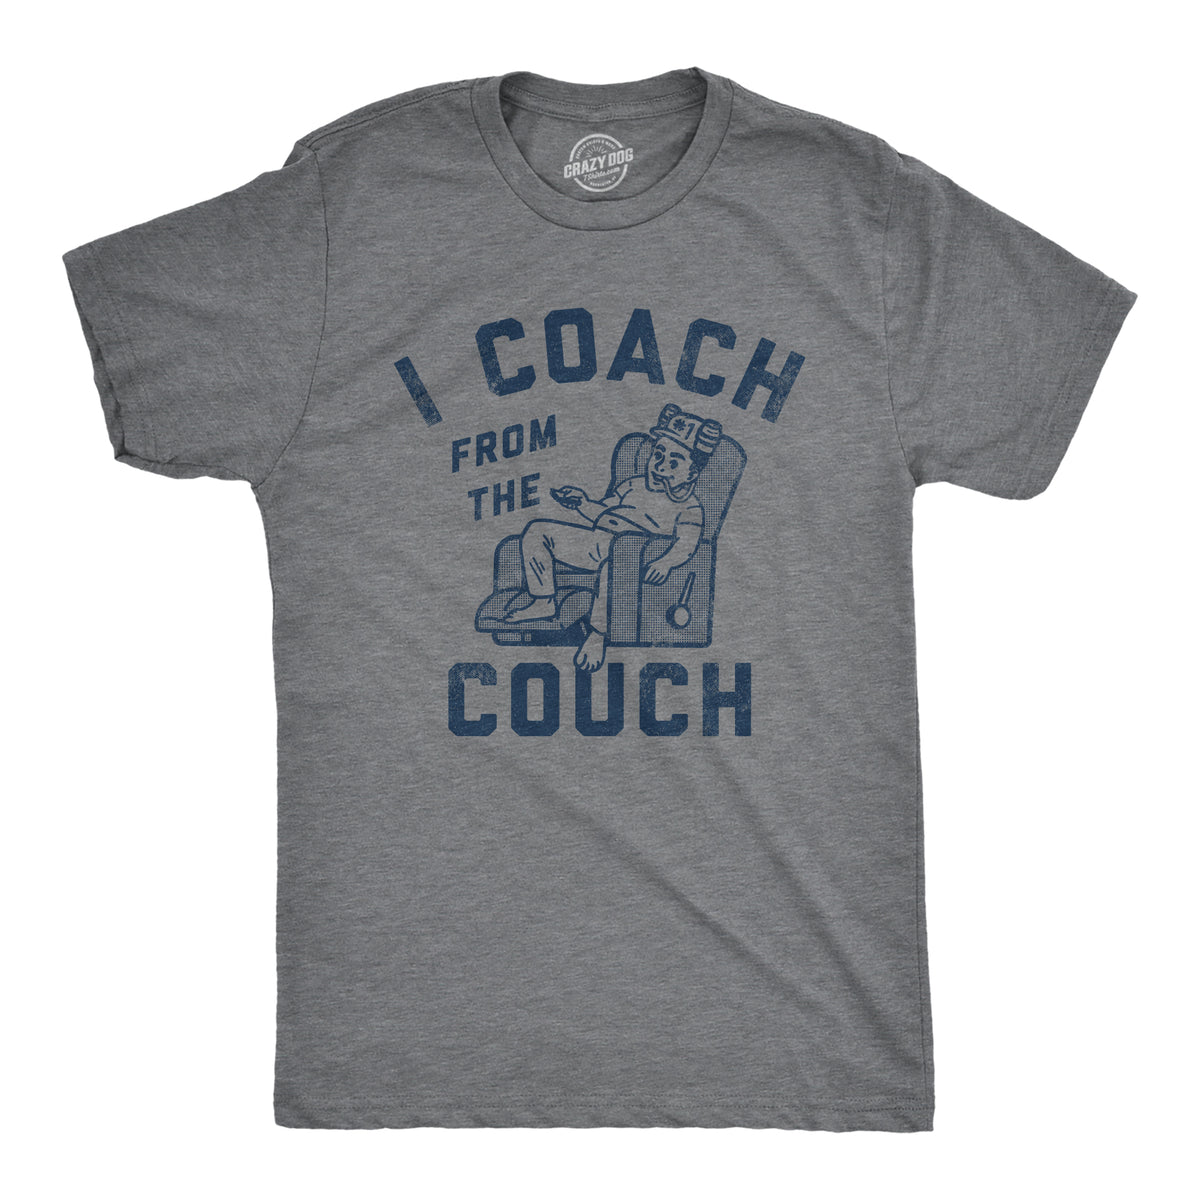 Funny Dark Heather Grey - COUCH I Coach From The Couch Mens T Shirt Nerdy sarcastic Tee